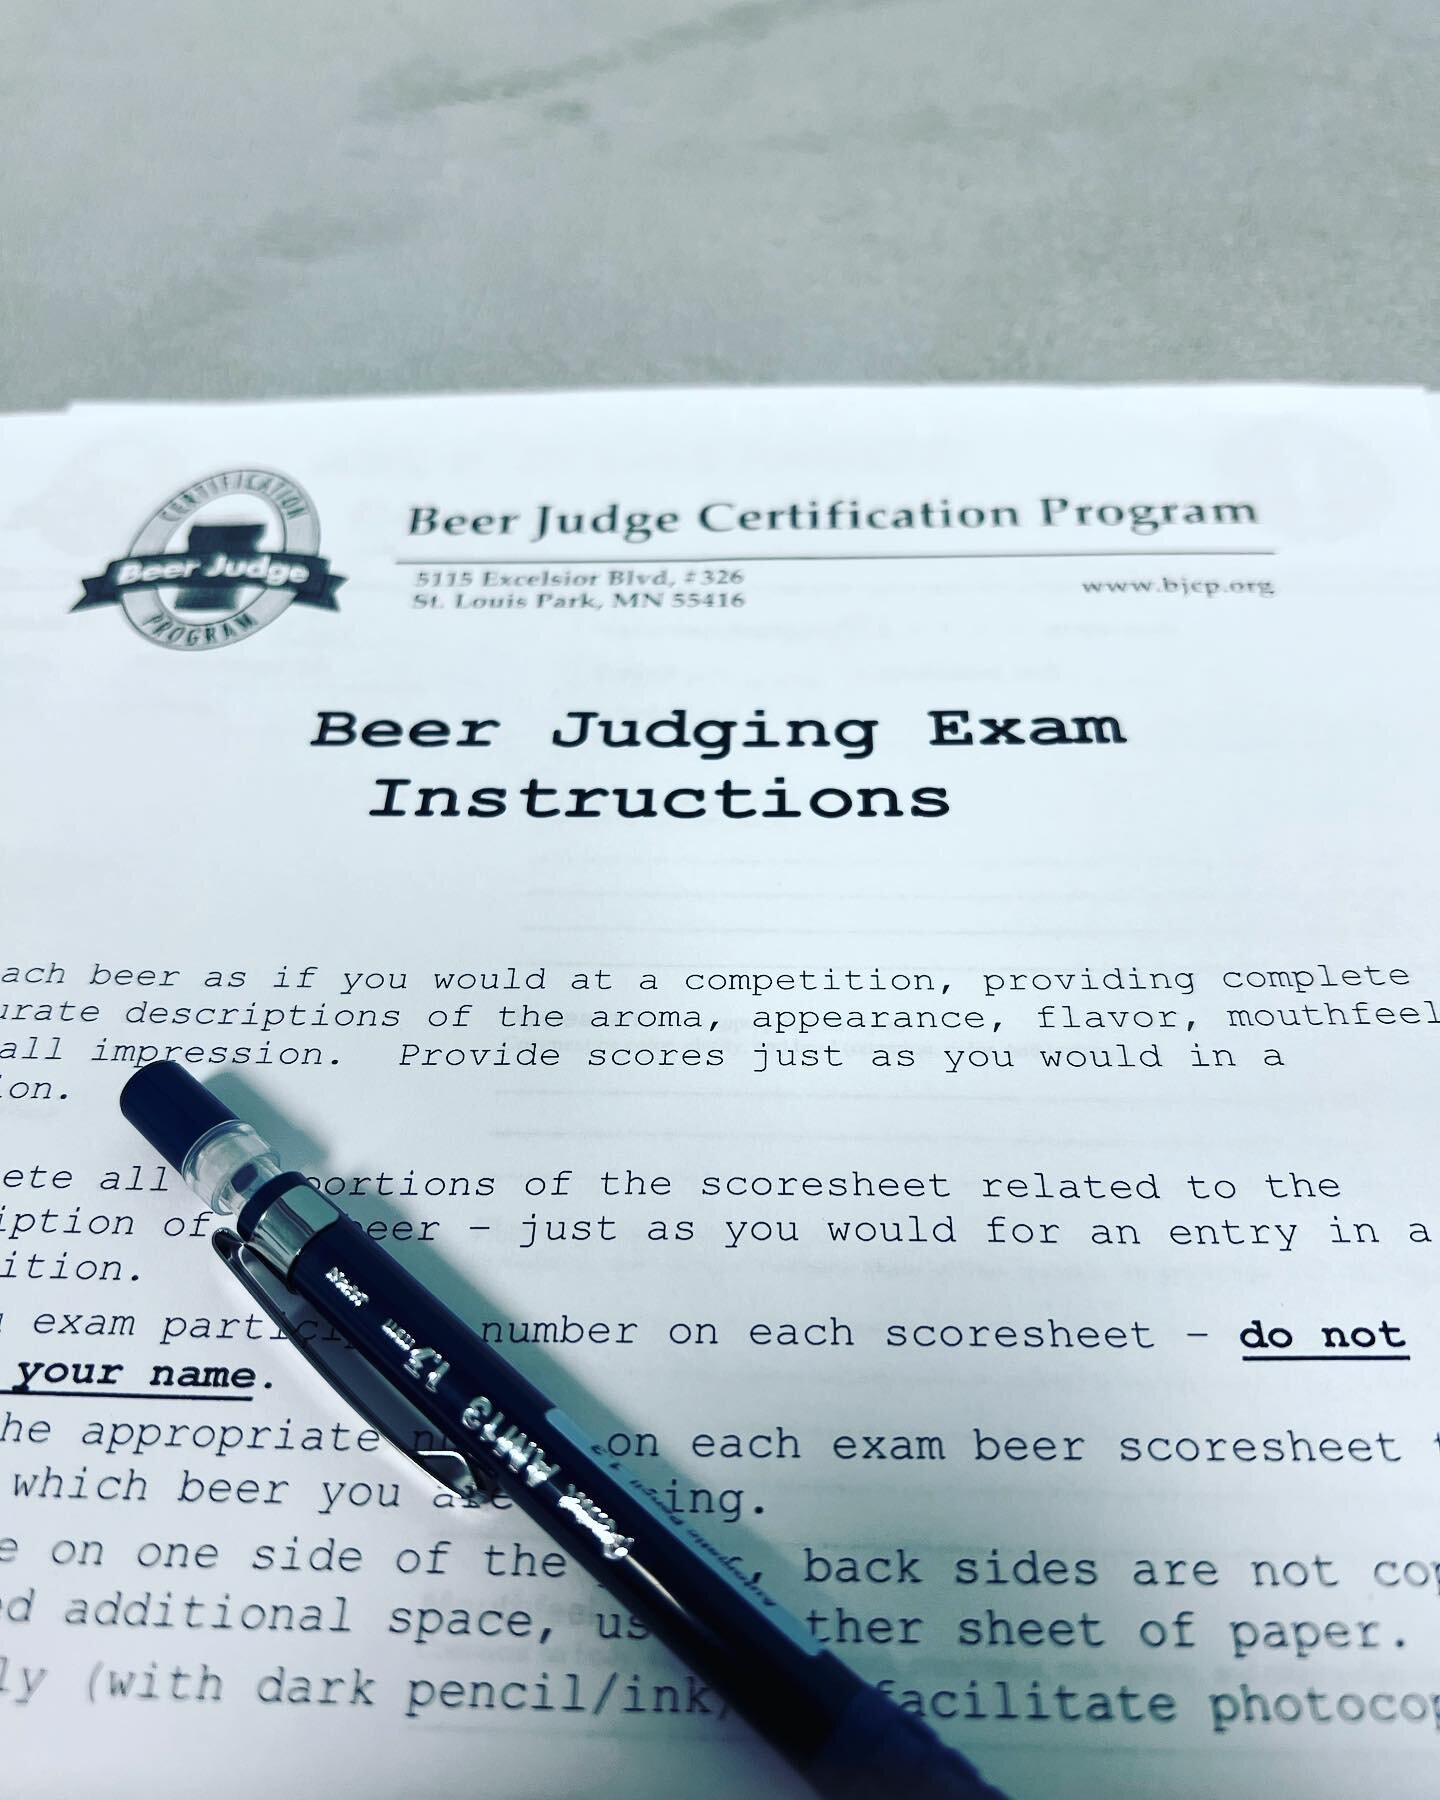 Today&rsquo;s the day!
#bjcp #homebrew #homebrewing #beerjudge